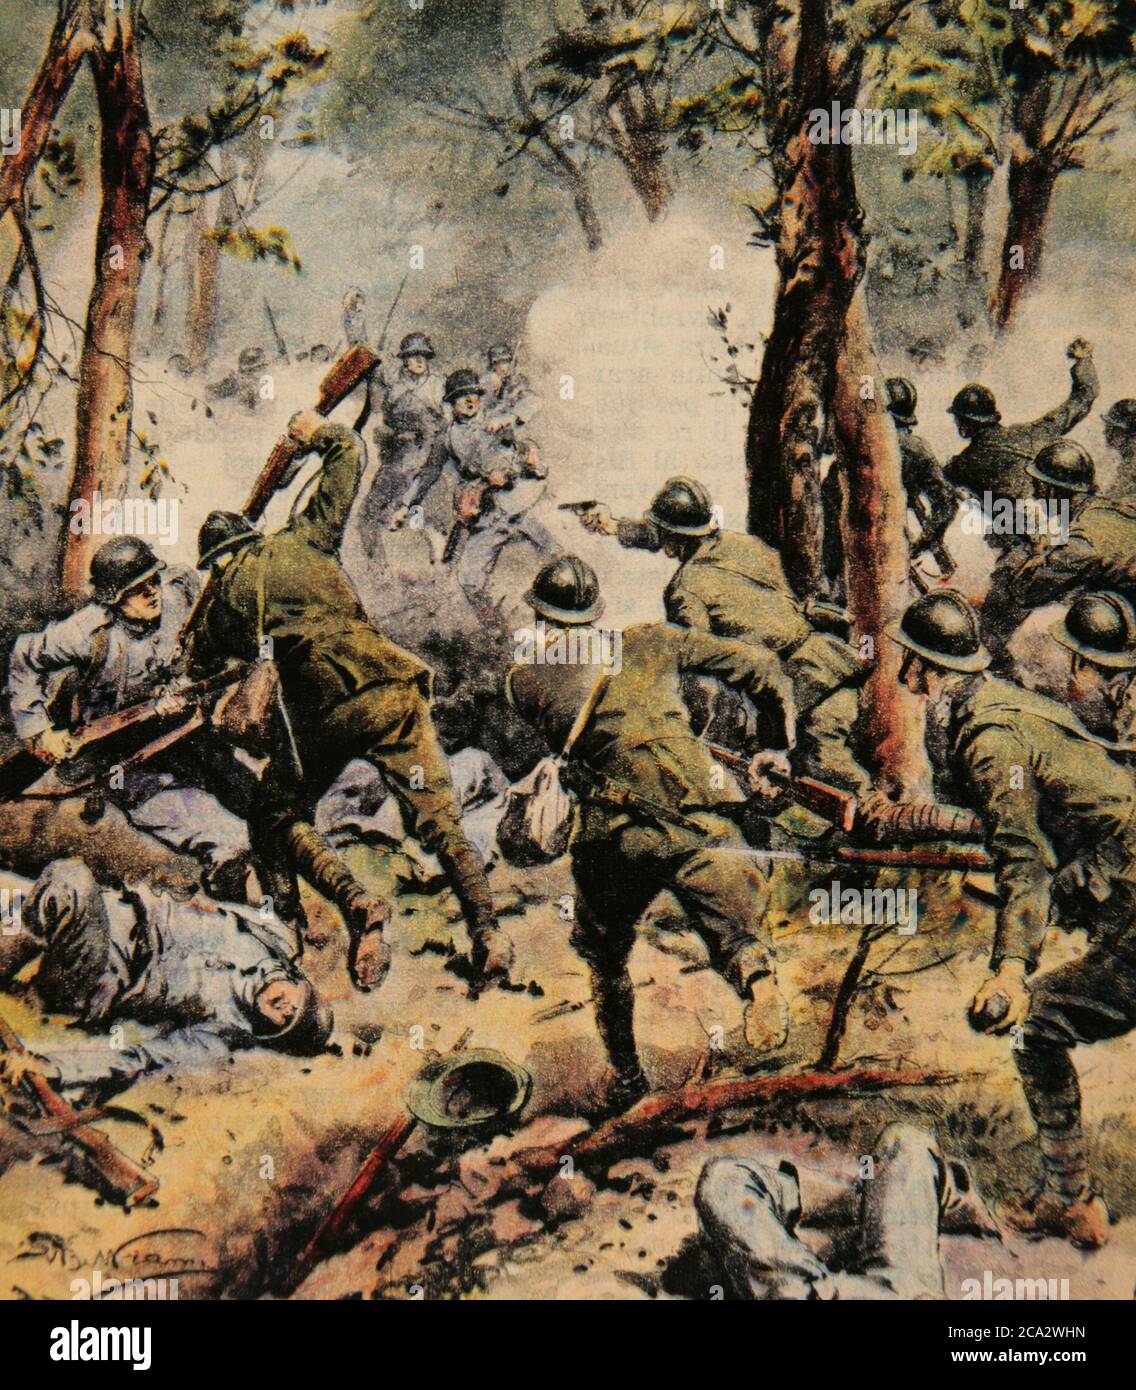 First World War (1914-1918). The successful counterattack of the Italian troops in the Ardre river valley, France. Illustration by Achille Beltrame (1871-1945). La Domenica del Corriere, 1918. Stock Photo